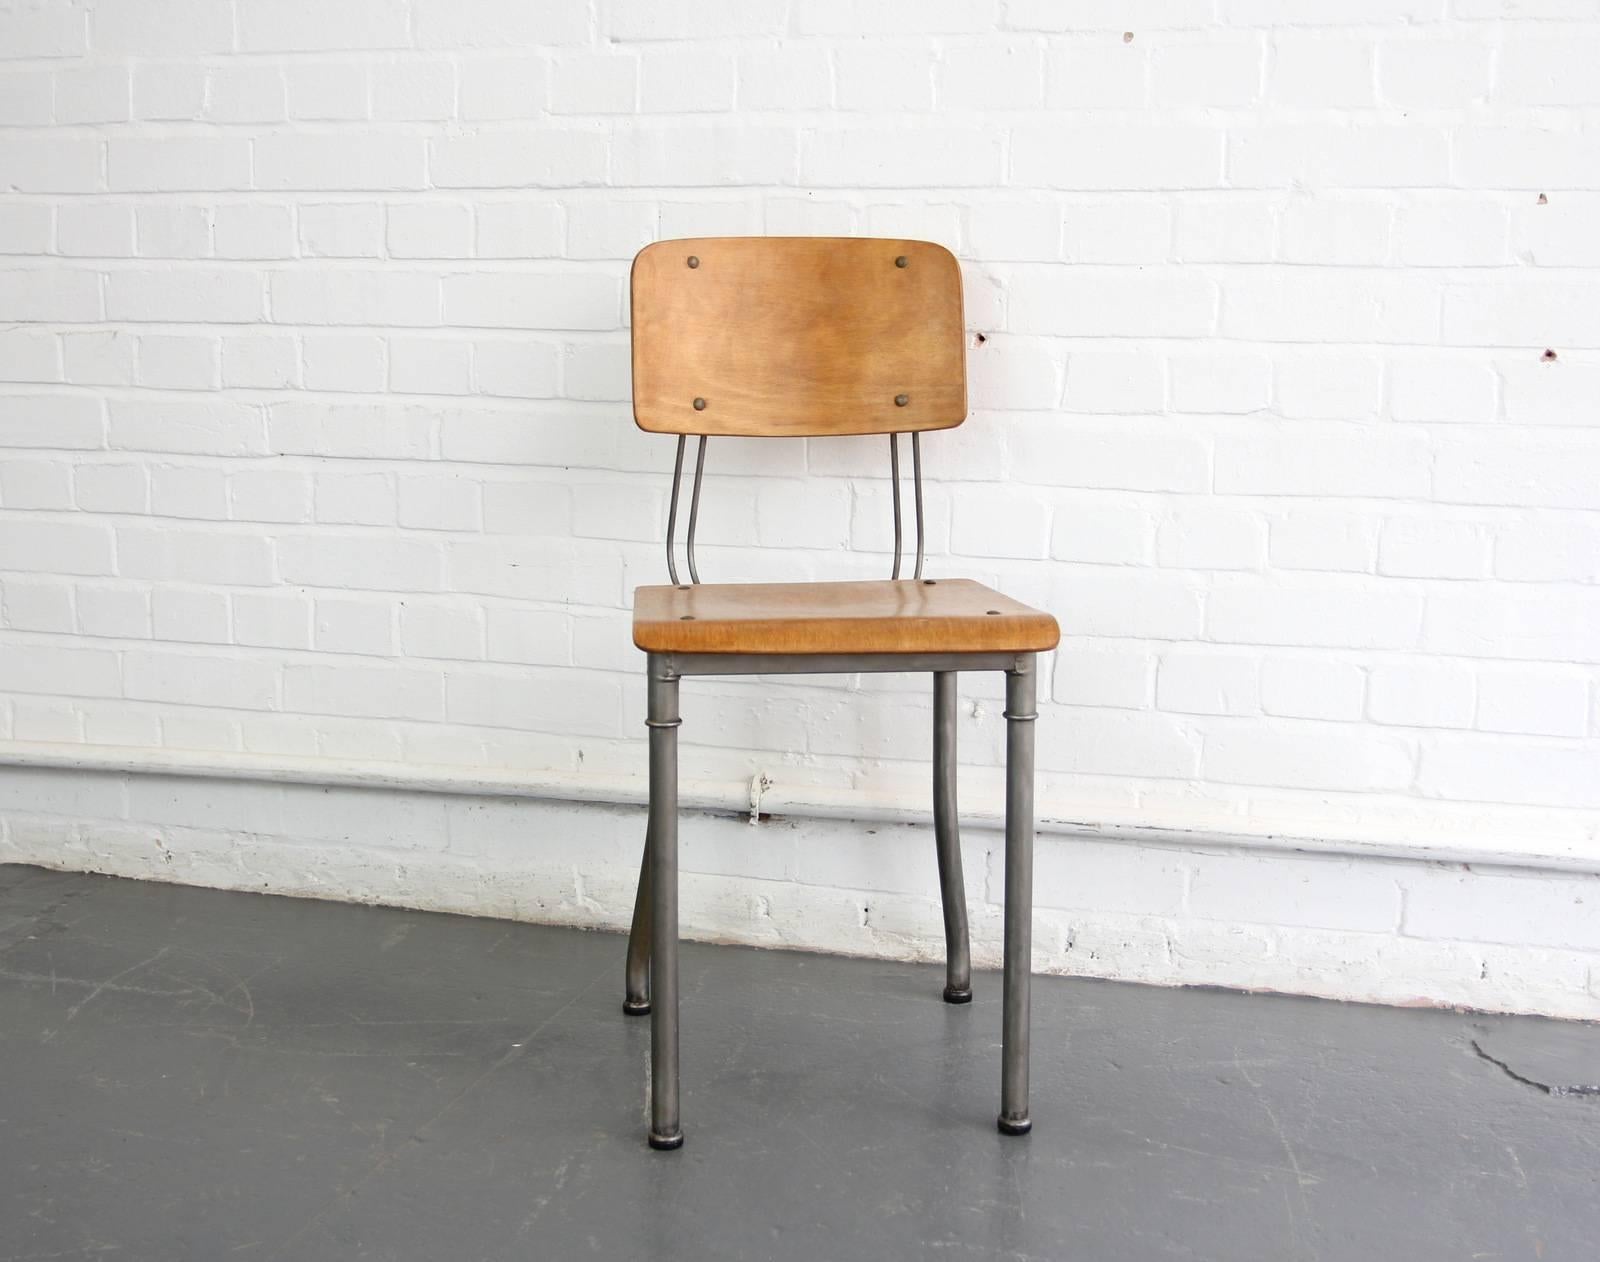 - Made from light tubular steel
- Shaped ply seat and back rest
- Unusual curved rear legs
- Believed to be an early Rowac Prototype chair
- German, circa 1920s.
- Measures: 37cm wide x 43cm deep x 84cm tall.
- 48cm from floor to